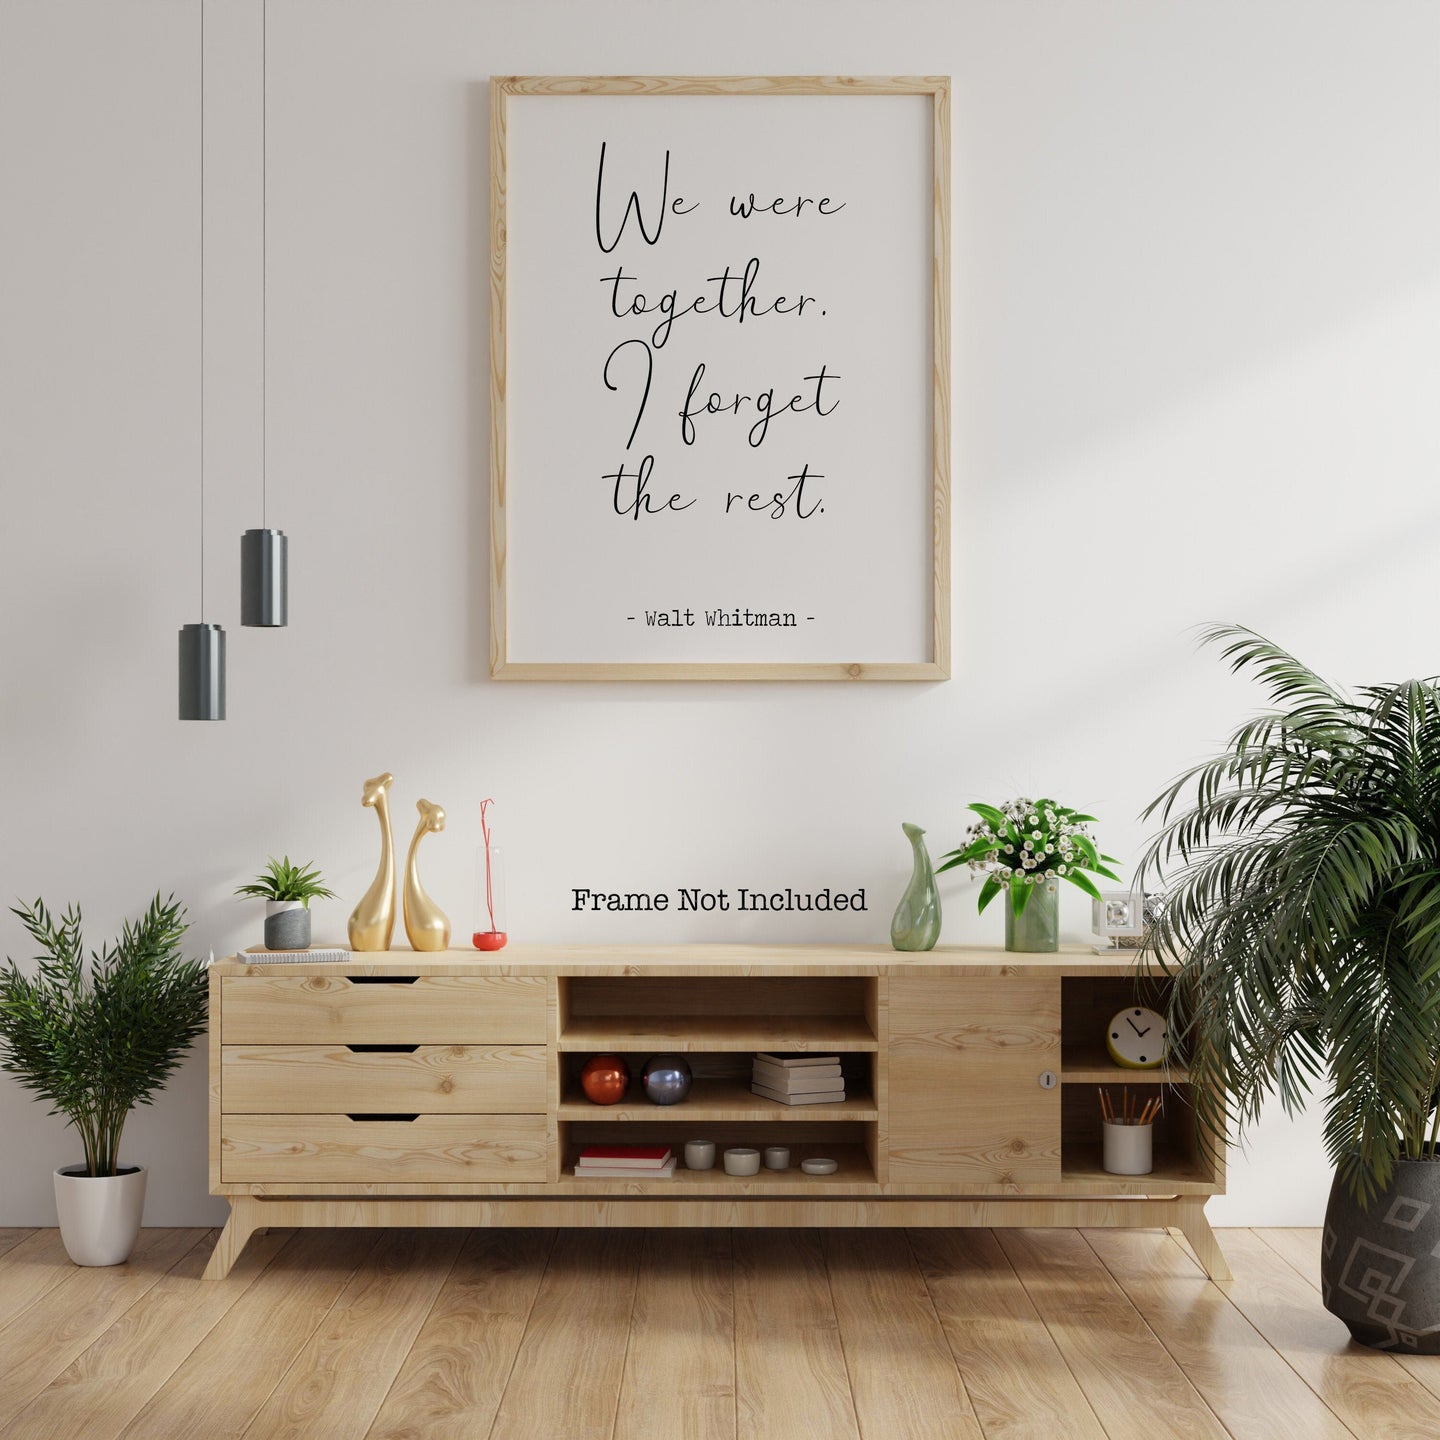 Walt Whitman Quote - We were together. I forget the rest - Love poetry print Romantic Bedroom Decor wall art print UNFRAMED